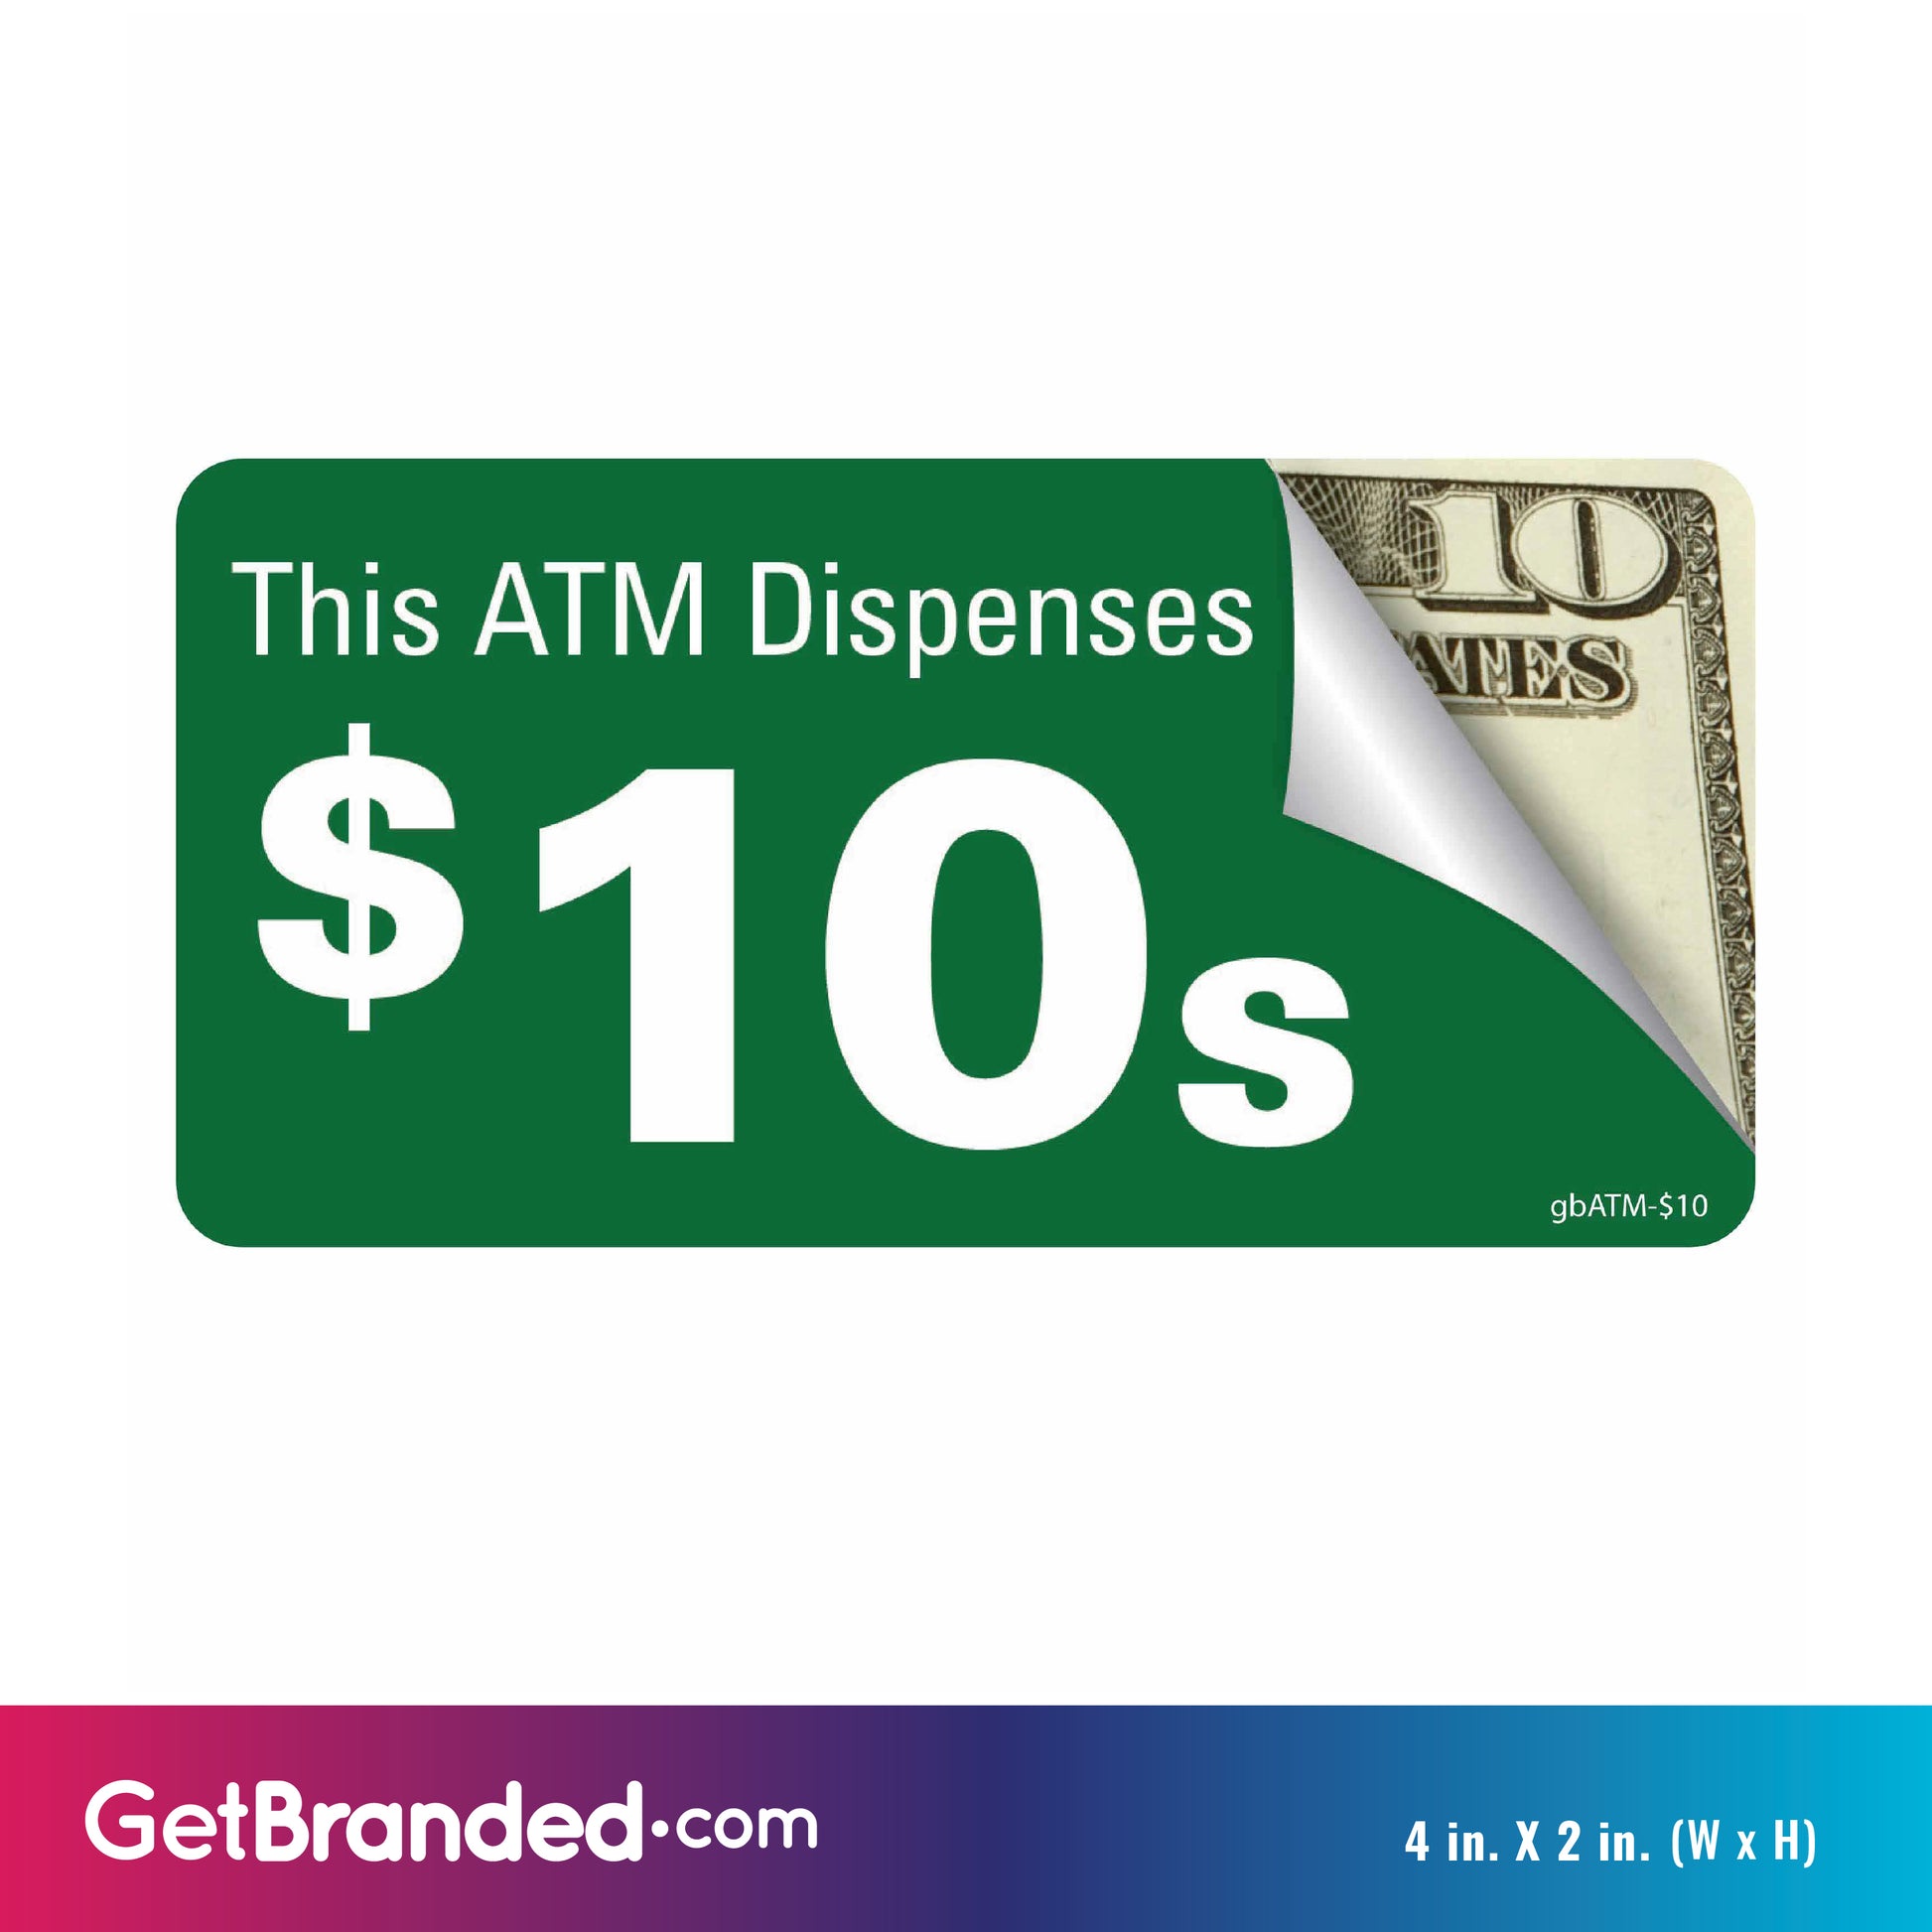 Pro ATM Dispense $10's Decal size guide. 4 inches by 2 inches in size.